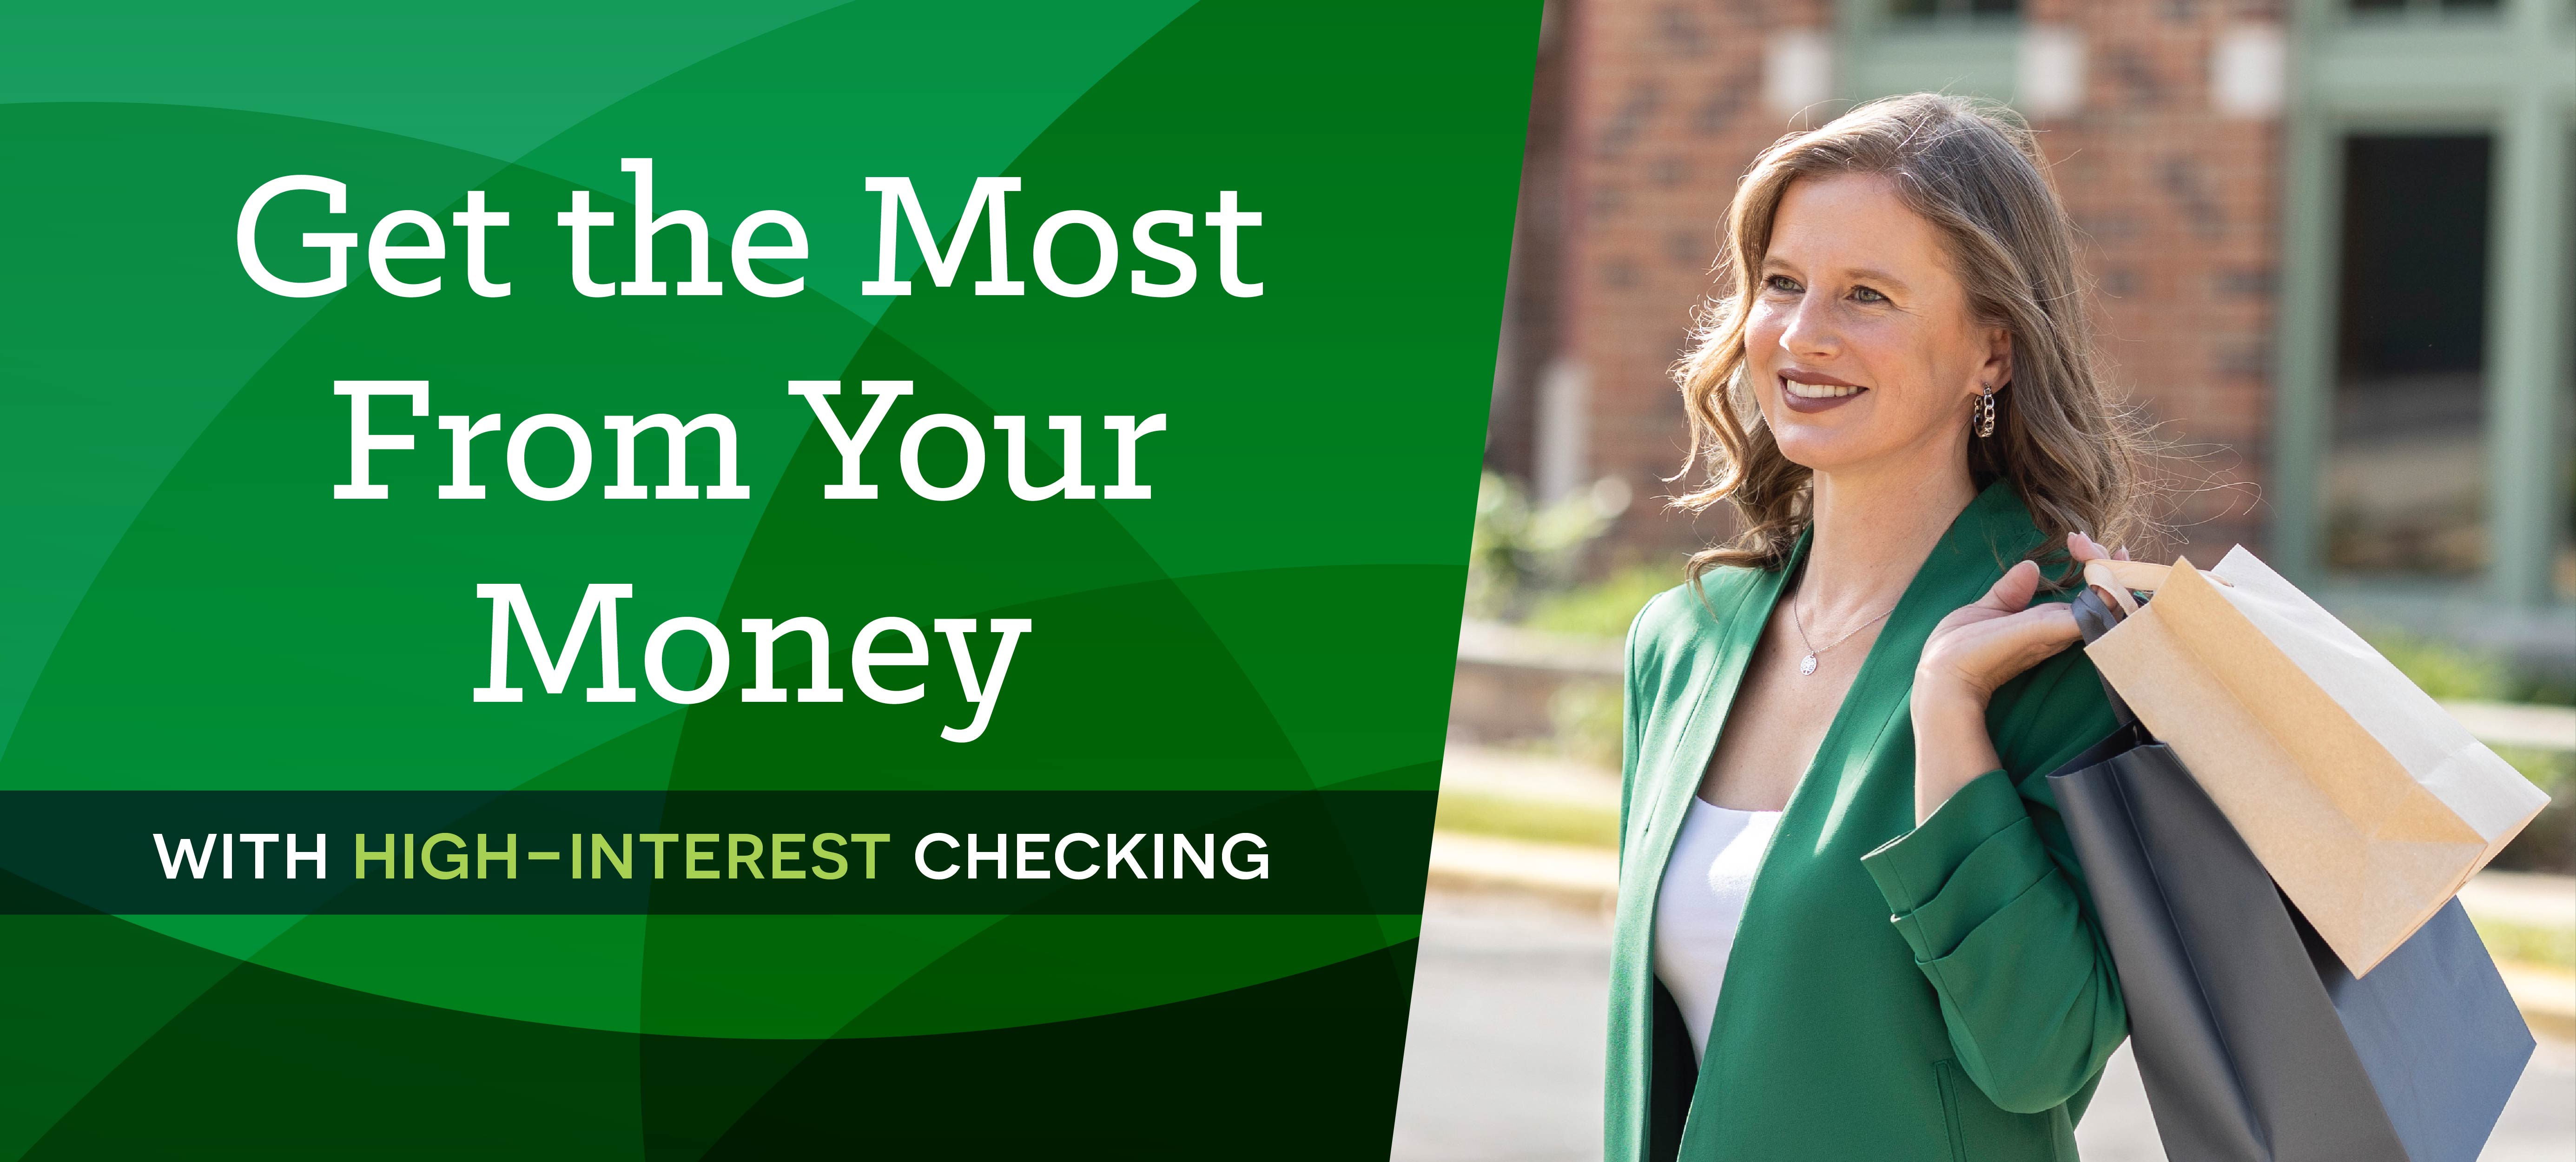 Get the most from your money with high-interest checking. 